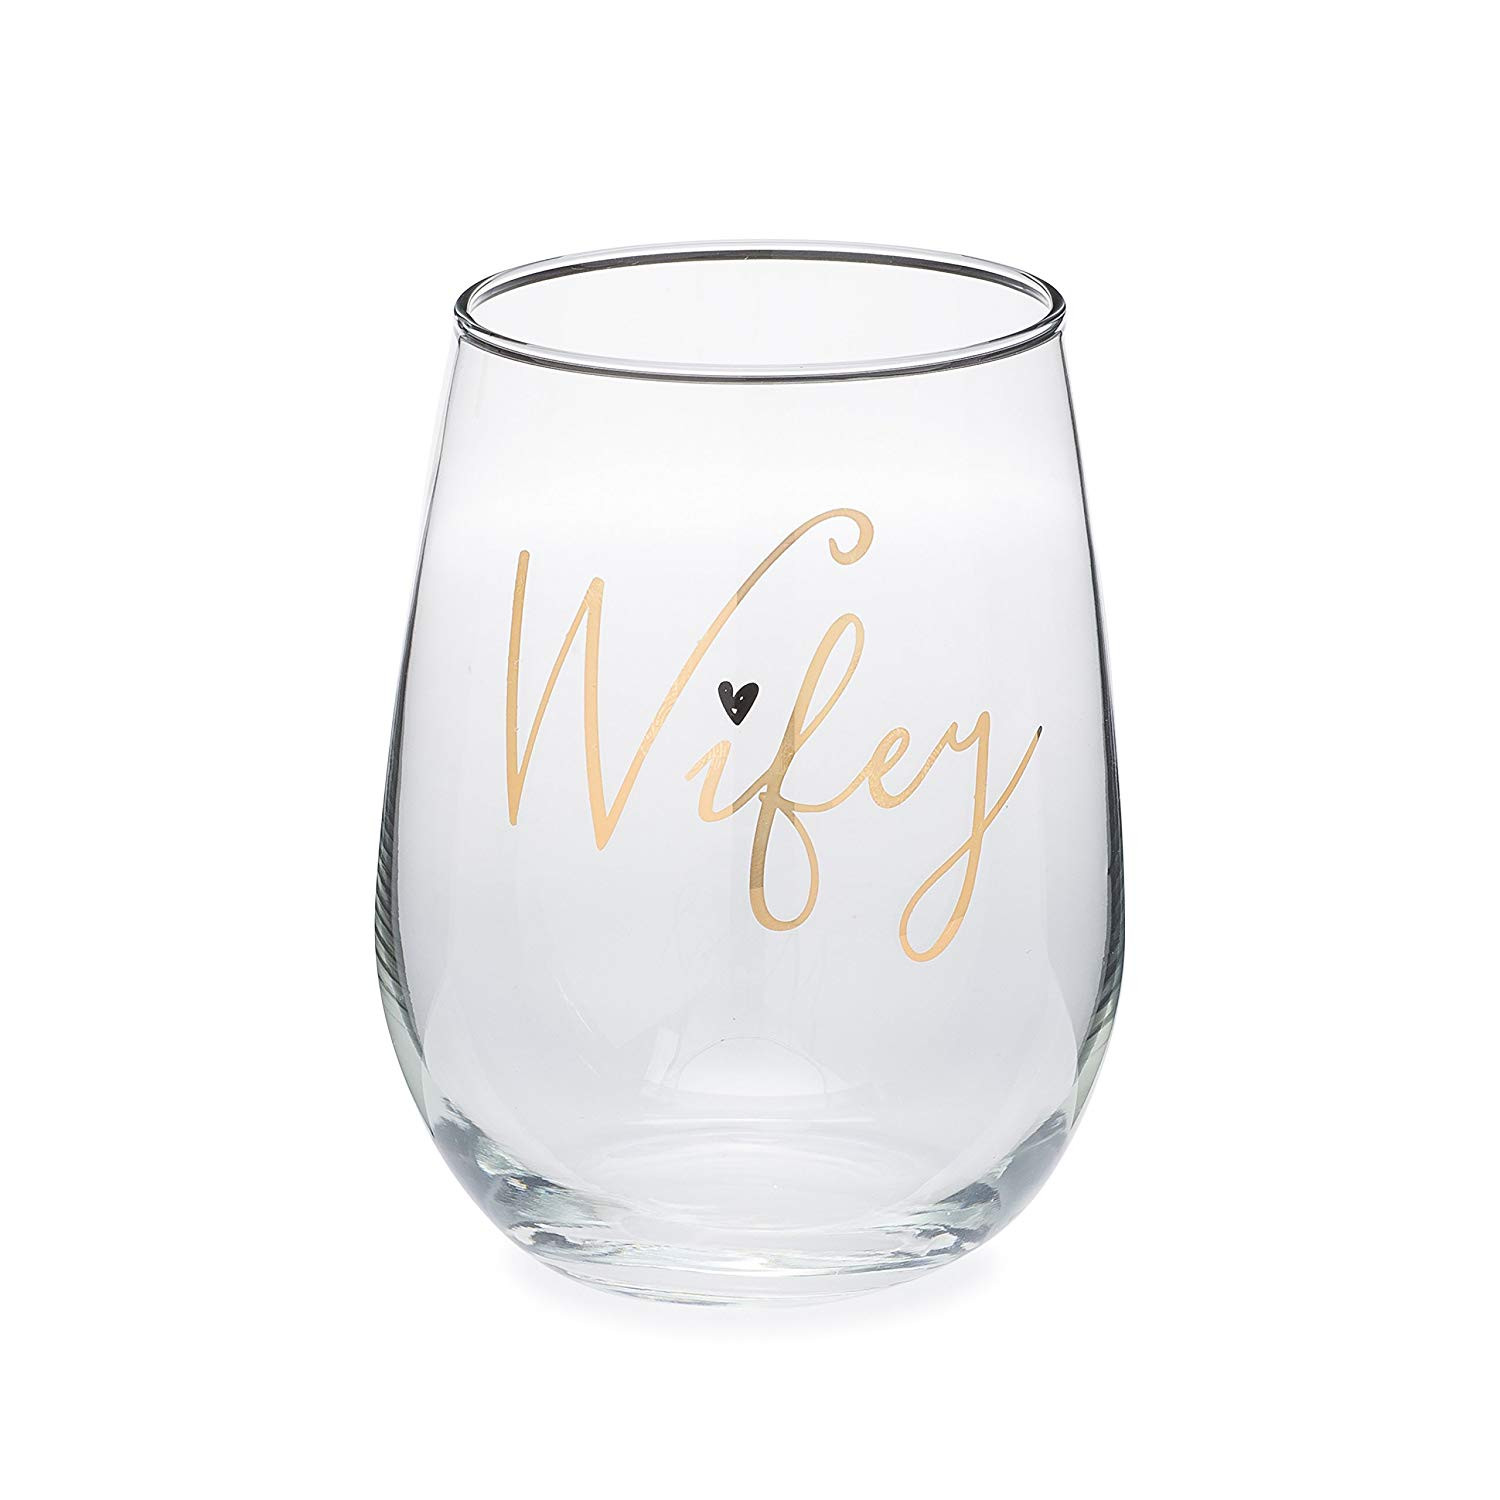 giant wine glass vase of amazon com wifey wine glass 17 oz stemless wife wine glass with amazon com wifey wine glass 17 oz stemless wife wine glass perfect bridal shower gift bride to be gift gift for wife bride gift wine glasses